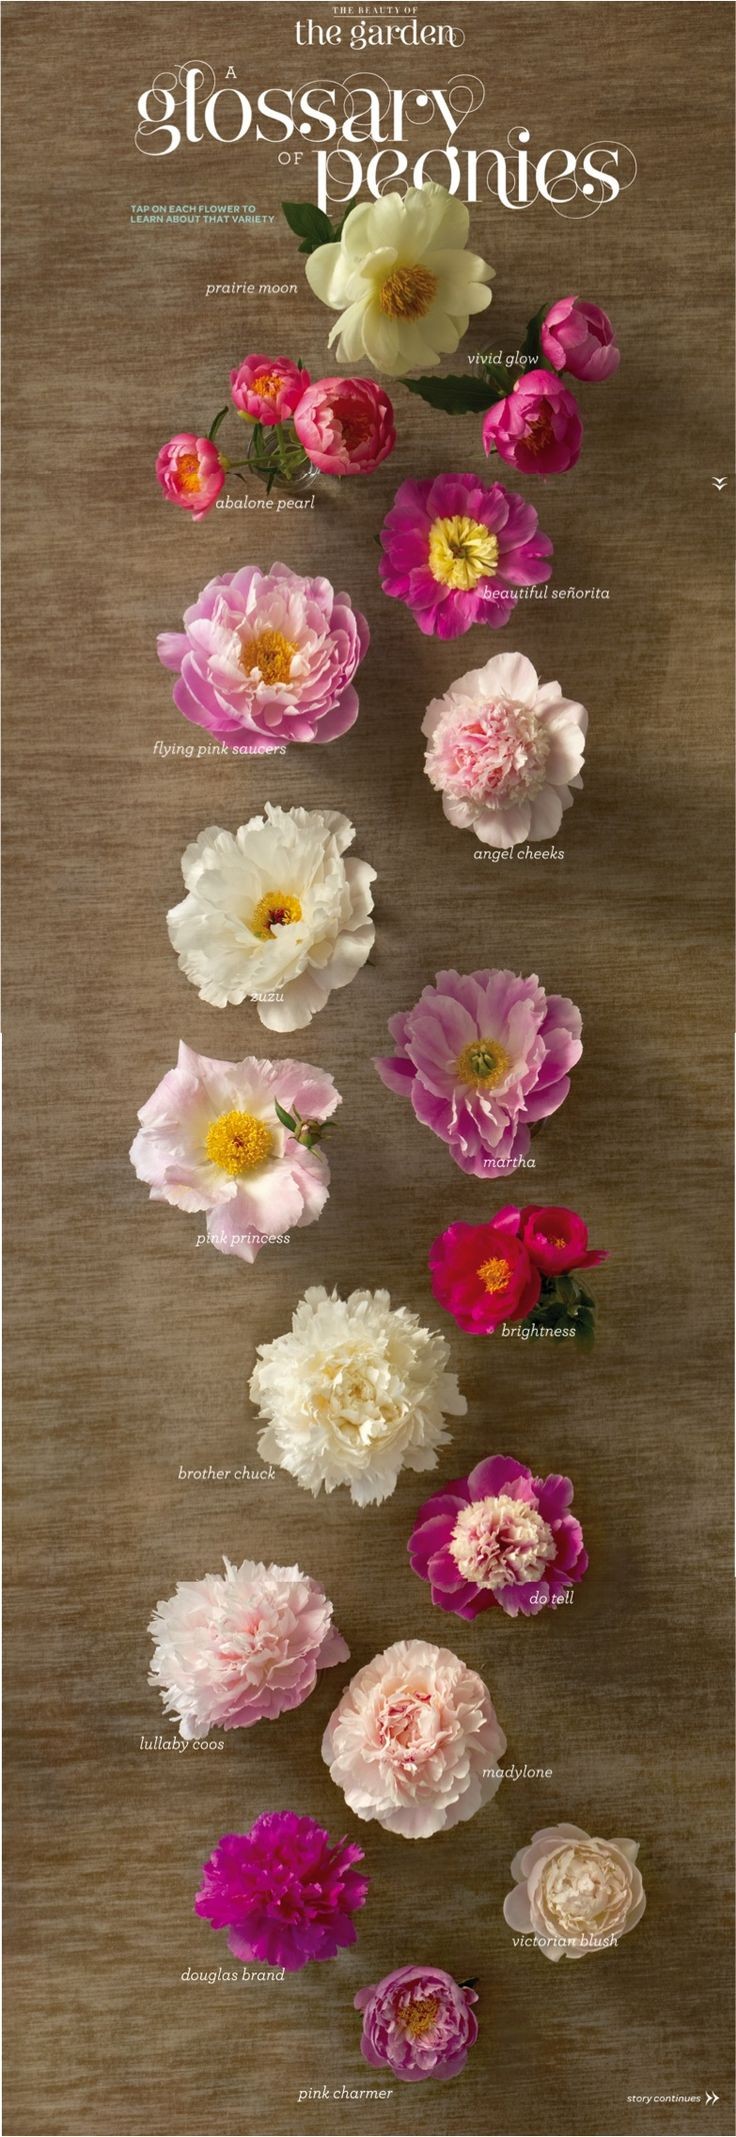 peonies ...omg check out the names..."angel cheeks...